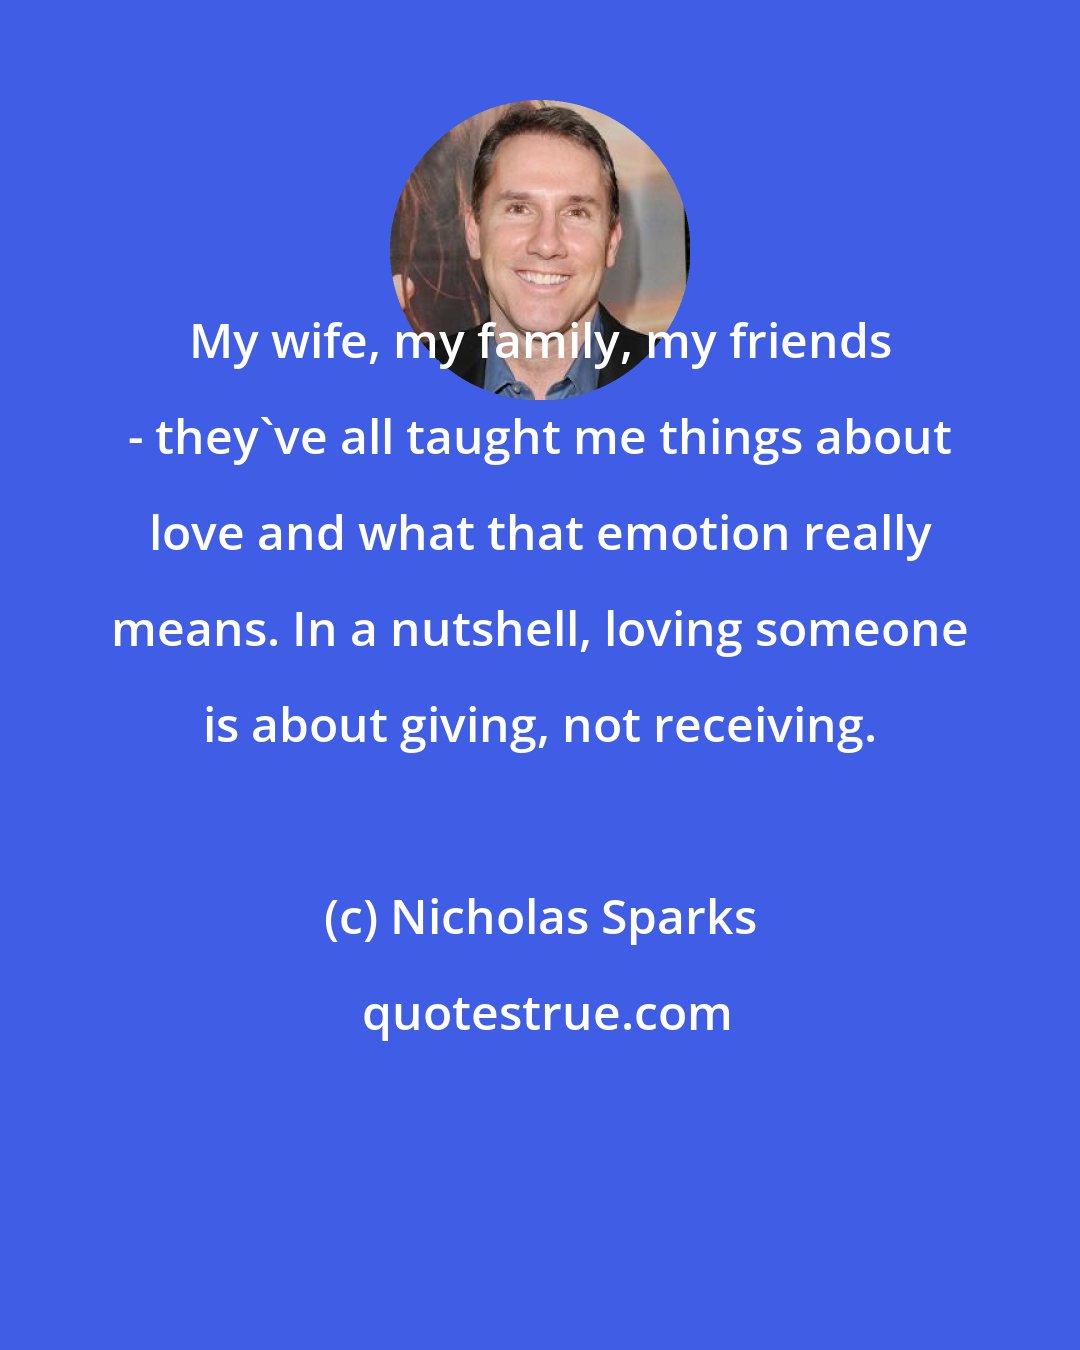 Nicholas Sparks: My wife, my family, my friends - they've all taught me things about love and what that emotion really means. In a nutshell, loving someone is about giving, not receiving.